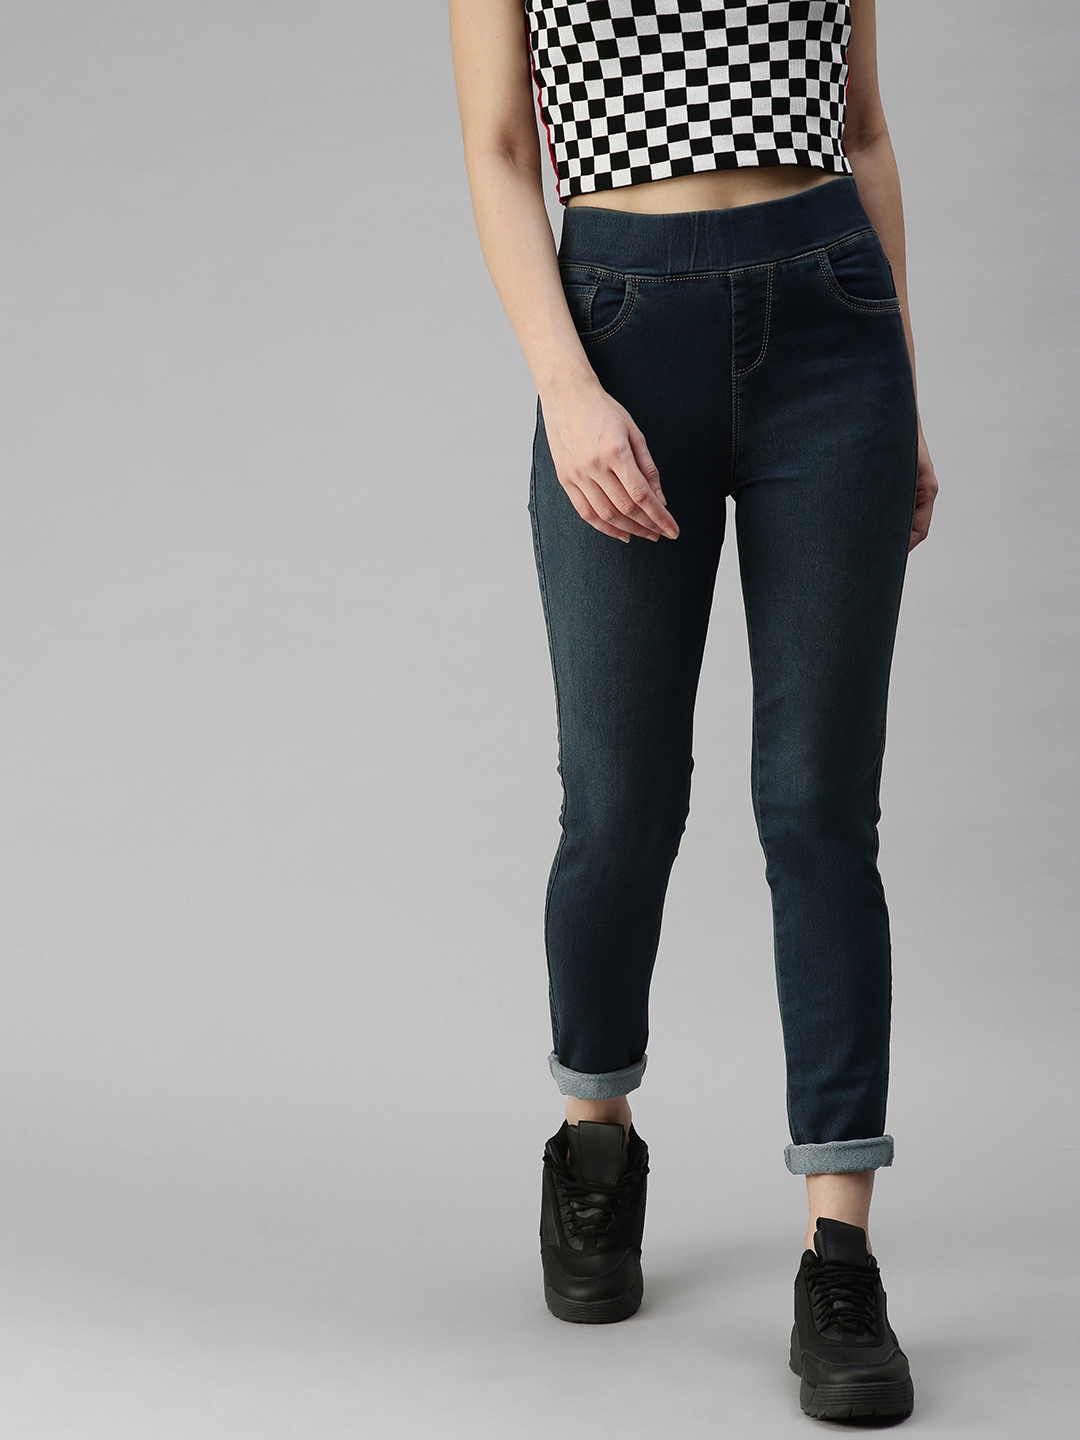 Showoff | Showoff Women's Skinny Fit Clean Look Blue Jeans